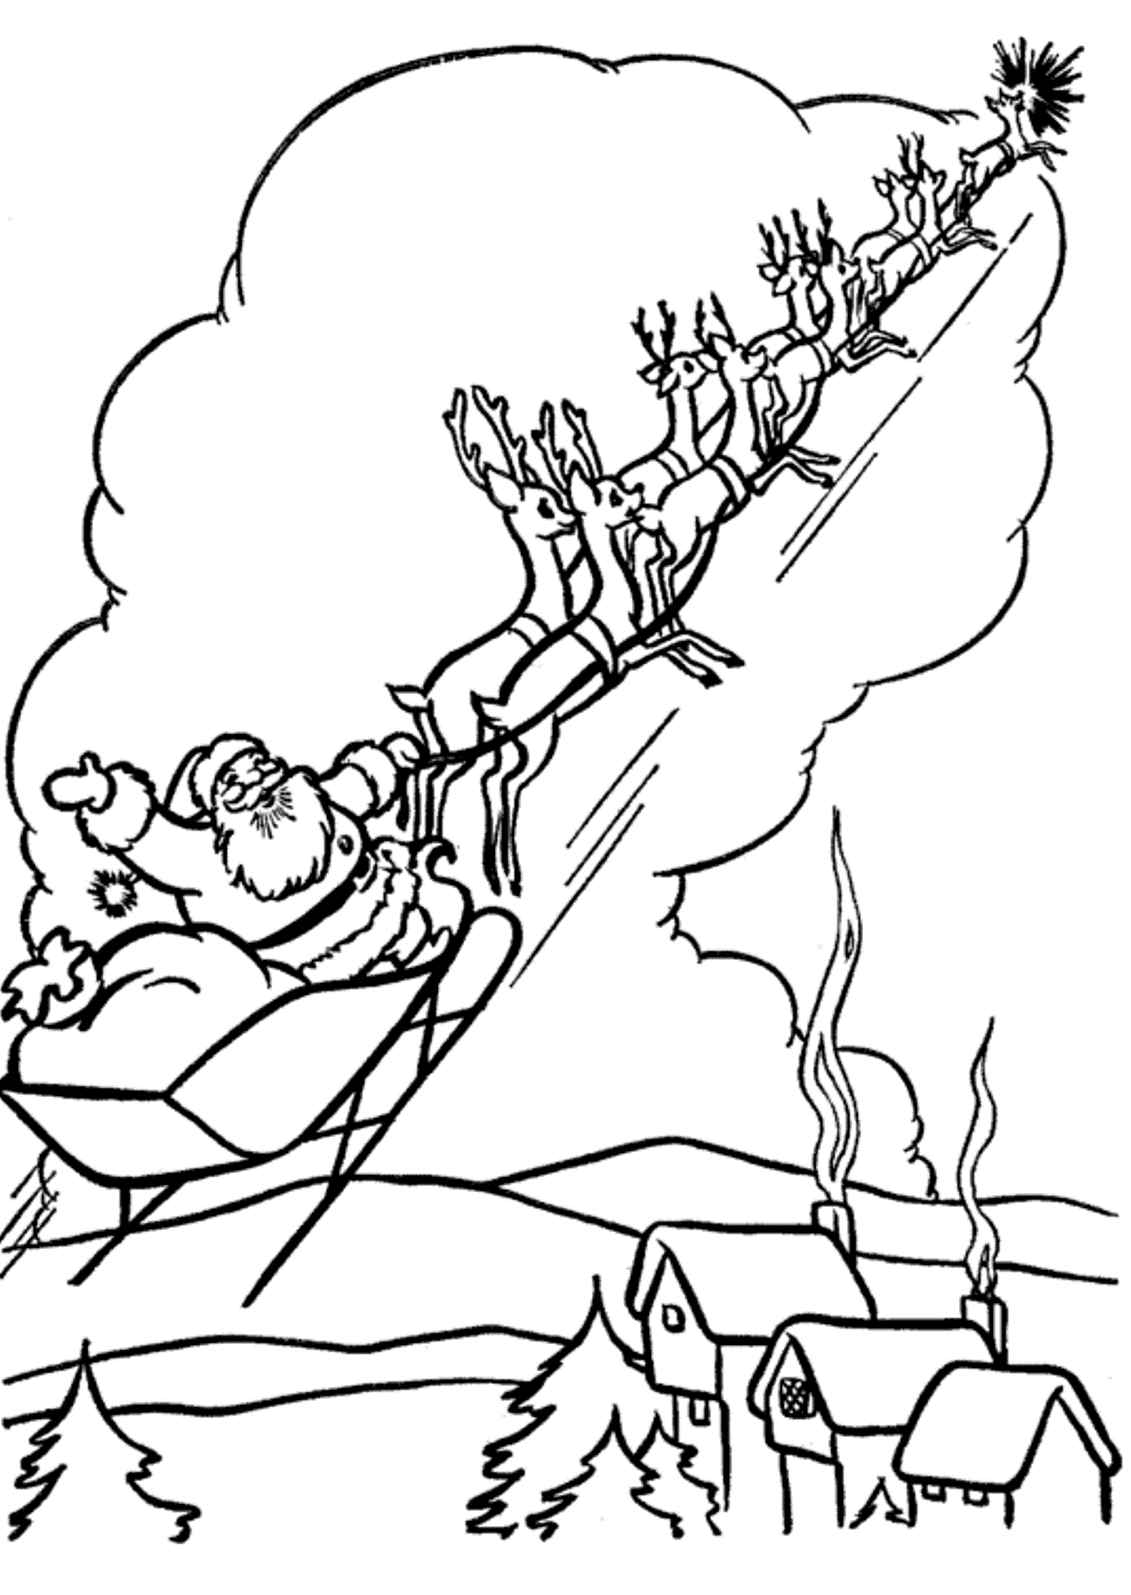 Santa Claus In Sleigh Coloring Page Coloring Pages Of Santa Claus Flying Christmas Coloring Pages Of